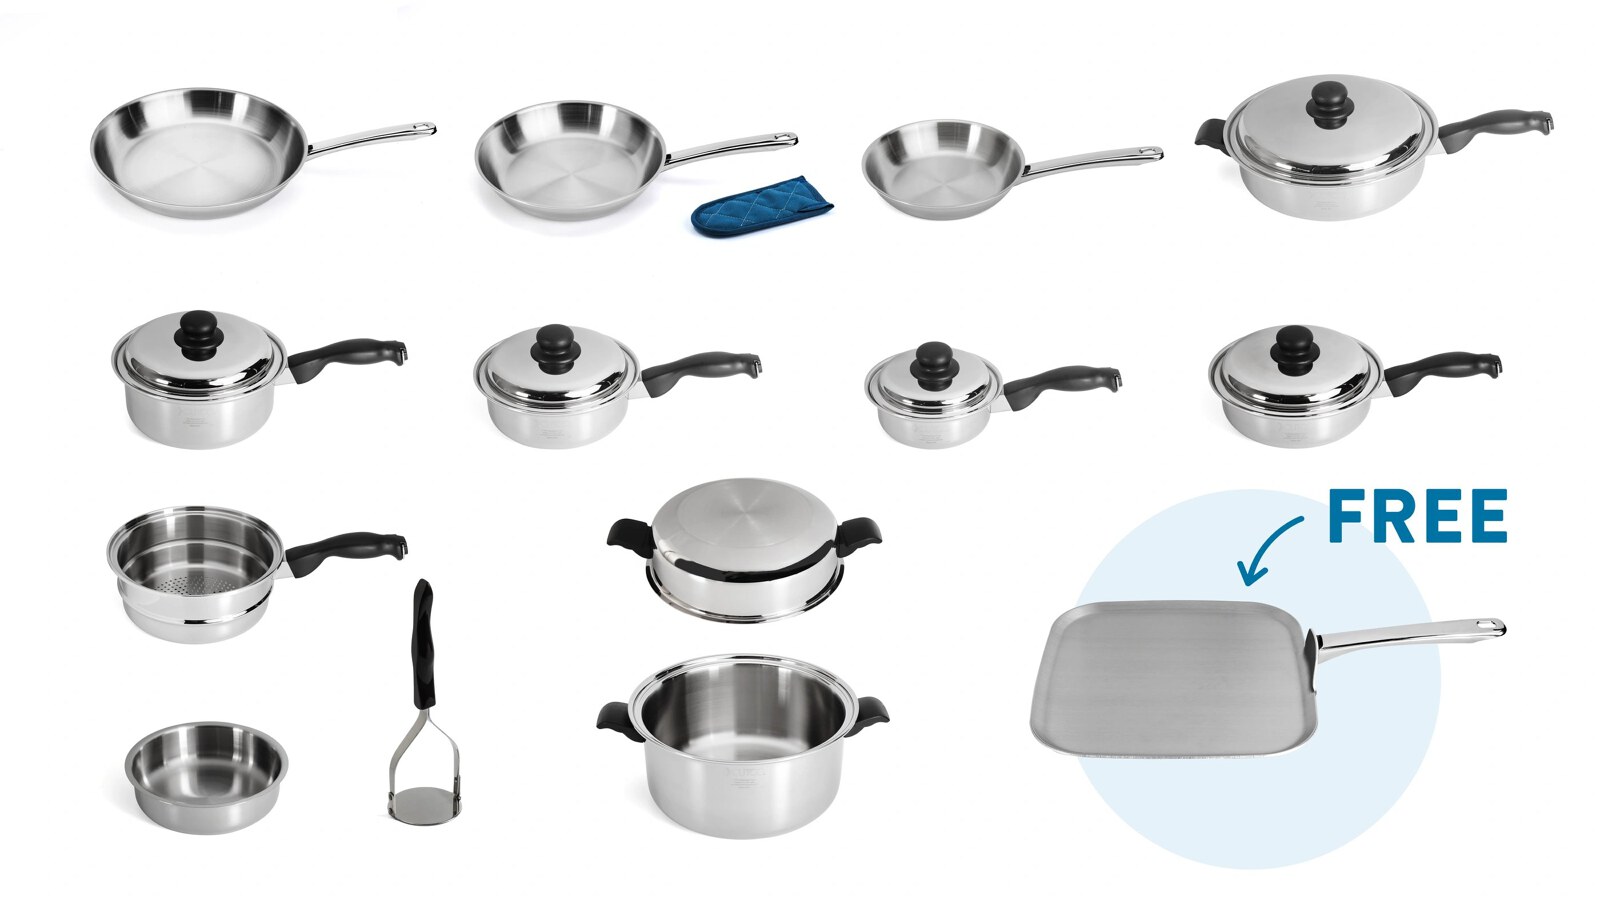 Accomplished Chef Cookware Set with FREE Griddle